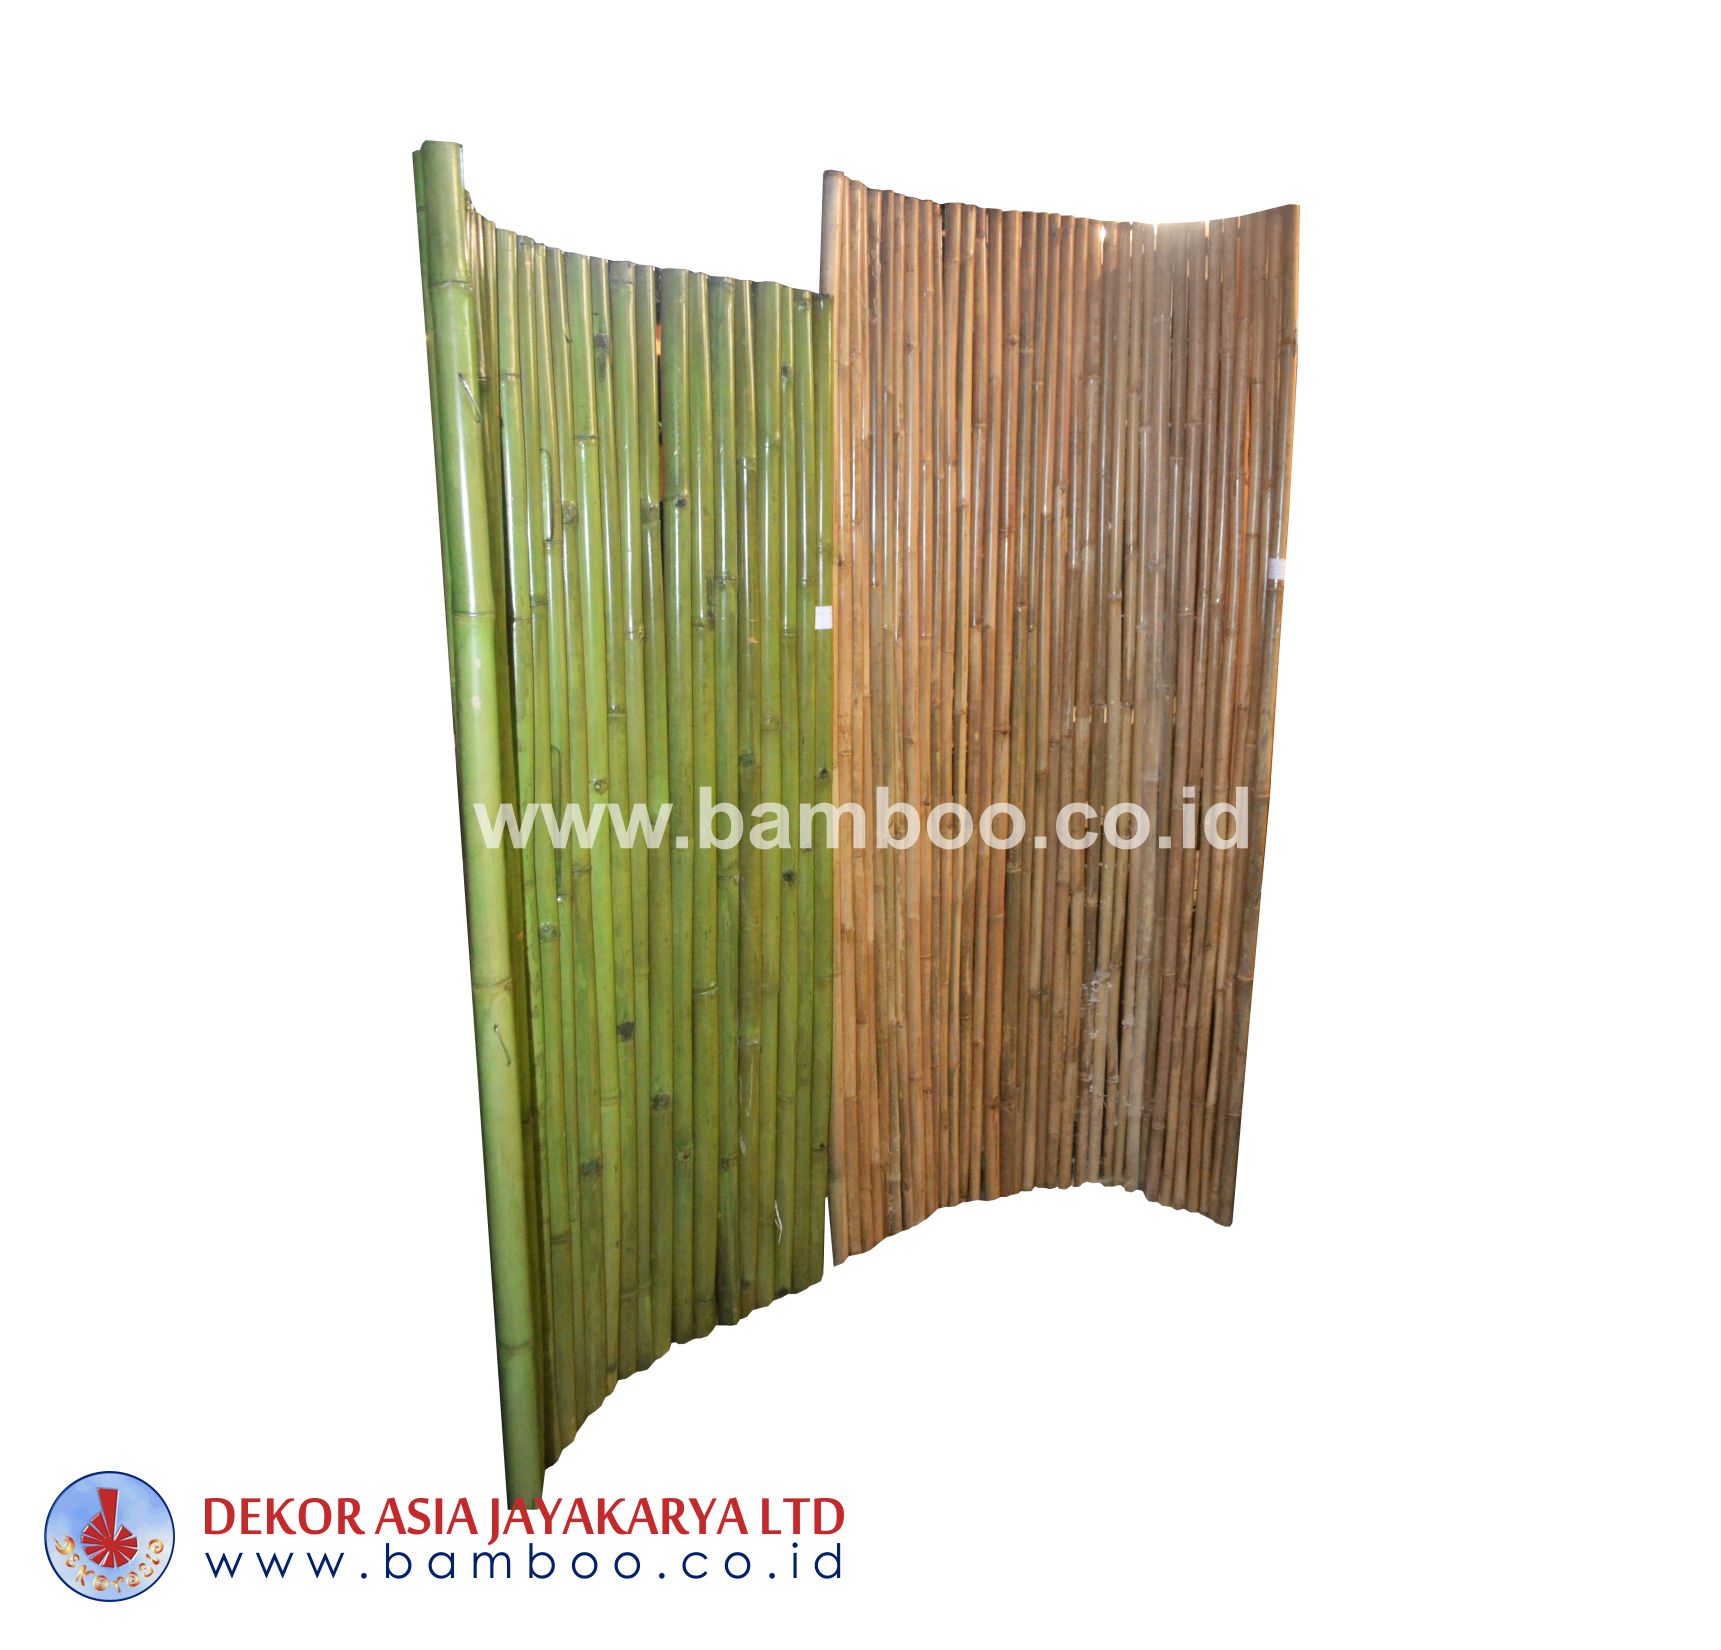 Bamboo Fence Green Natural Pole